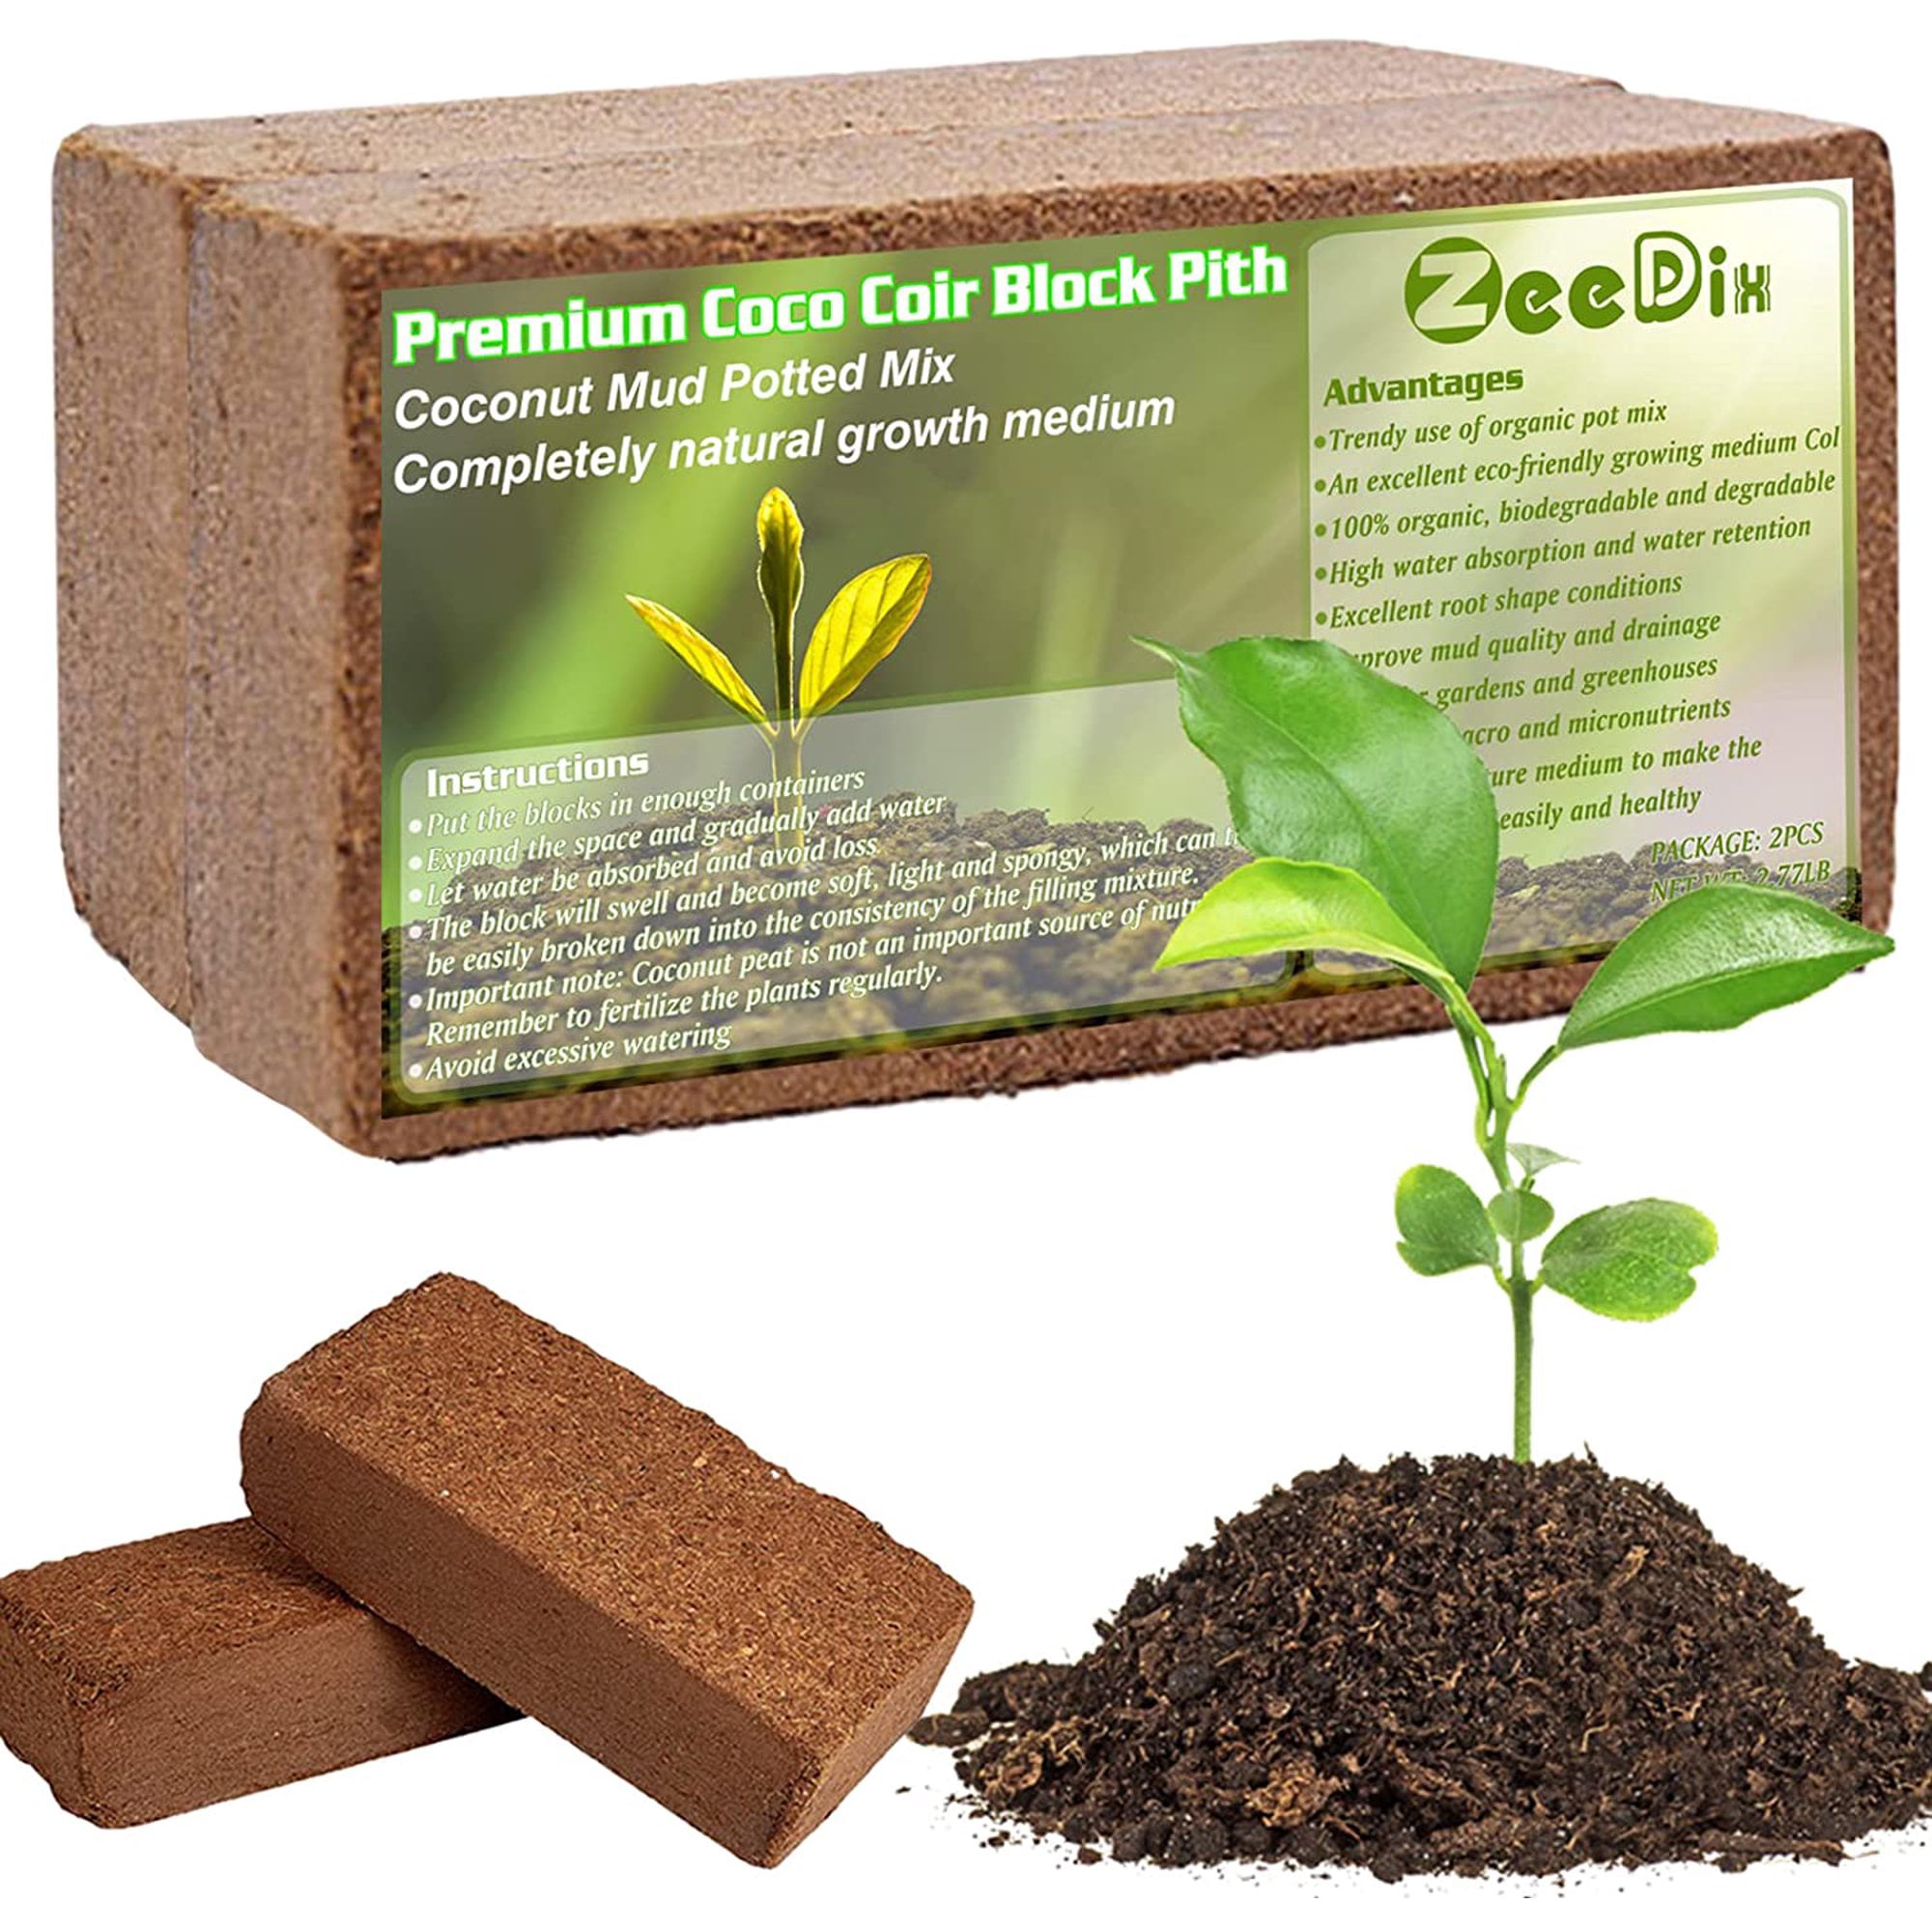 100% NATURAL Coconut Peat Coco Coir Fiber Soil ORGANIC COMPOSTHYDROPONIC GROWING 